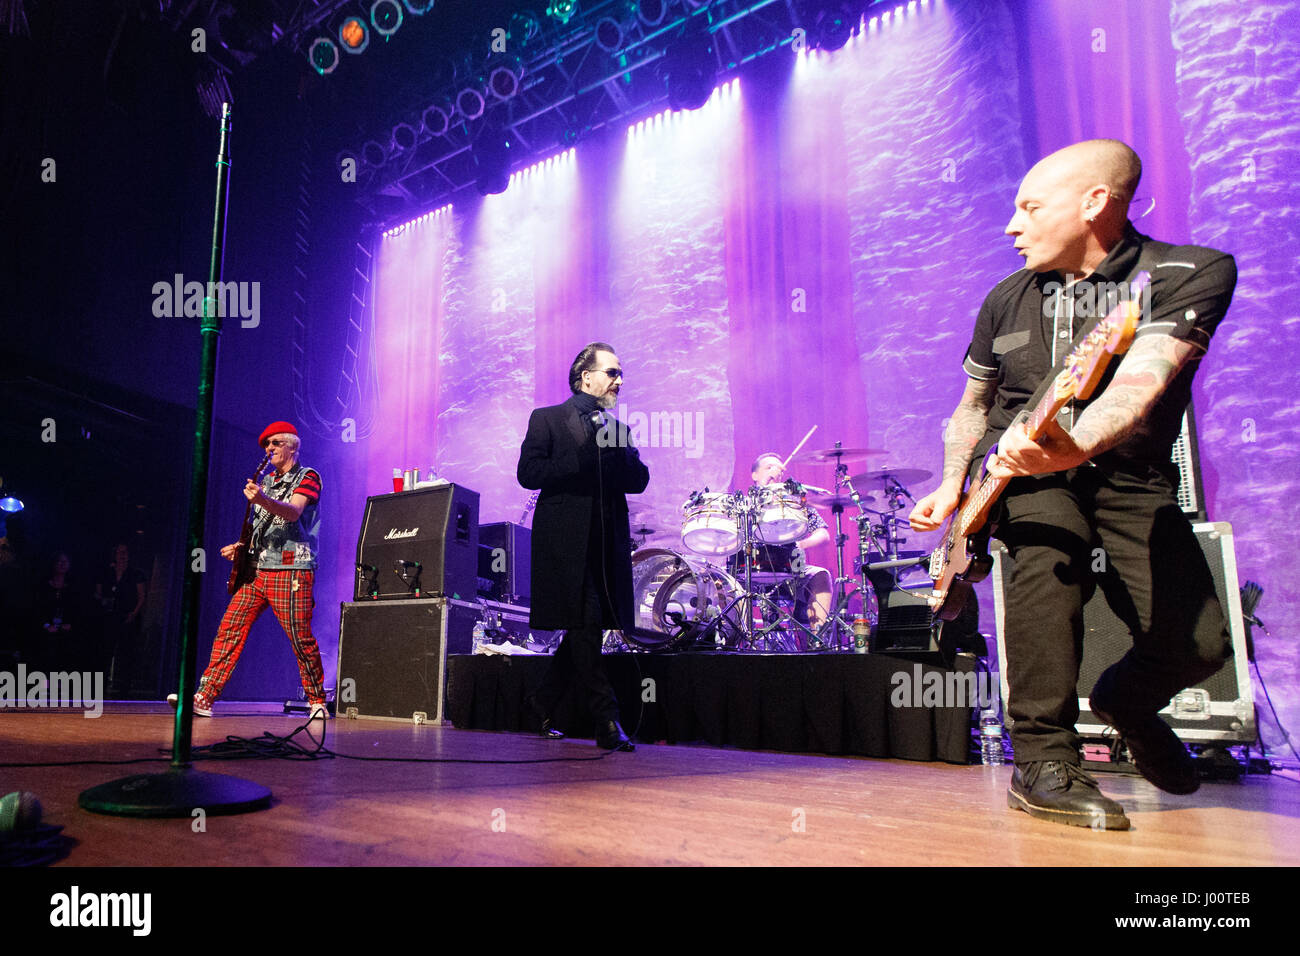 San Diego, California. April 7, 2017. Bassist Stu West  performs with the Damned at the House of Blues. Behind him are guitarist Captain Sensible, singer Dave Vanion, and drummer Pinch. Originally formed in 1976 in London, The Damned is on their 40th anniversary tour. Stock Photo